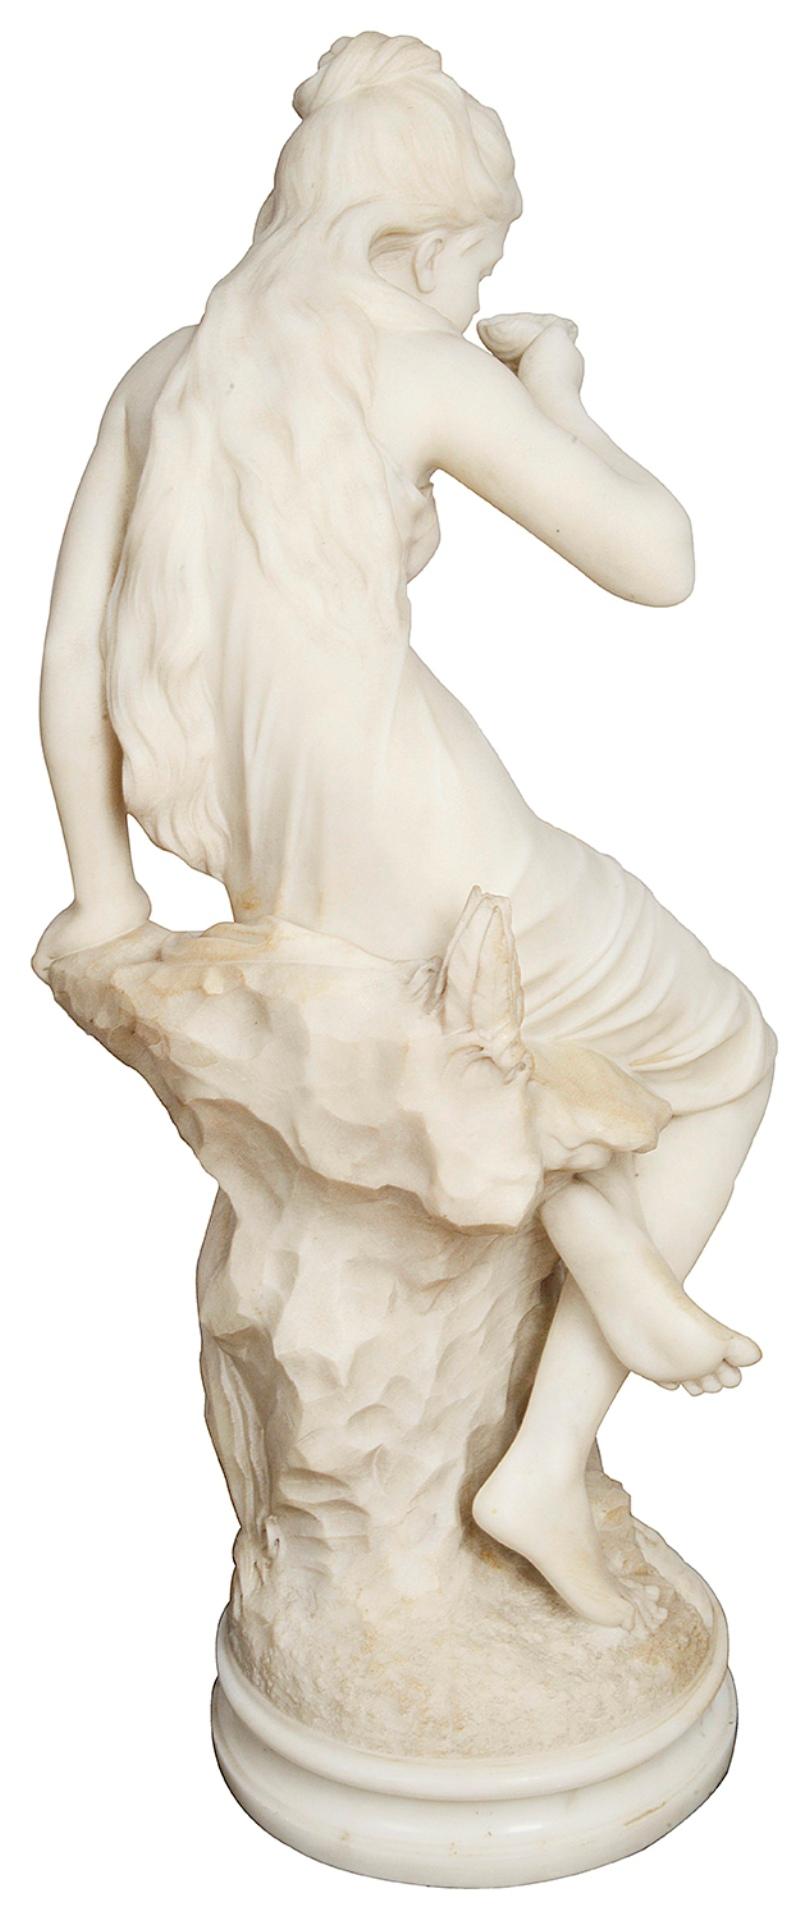 Romantic 19th Century Marble Statue of a Young Girl, by Orazio Andreoni